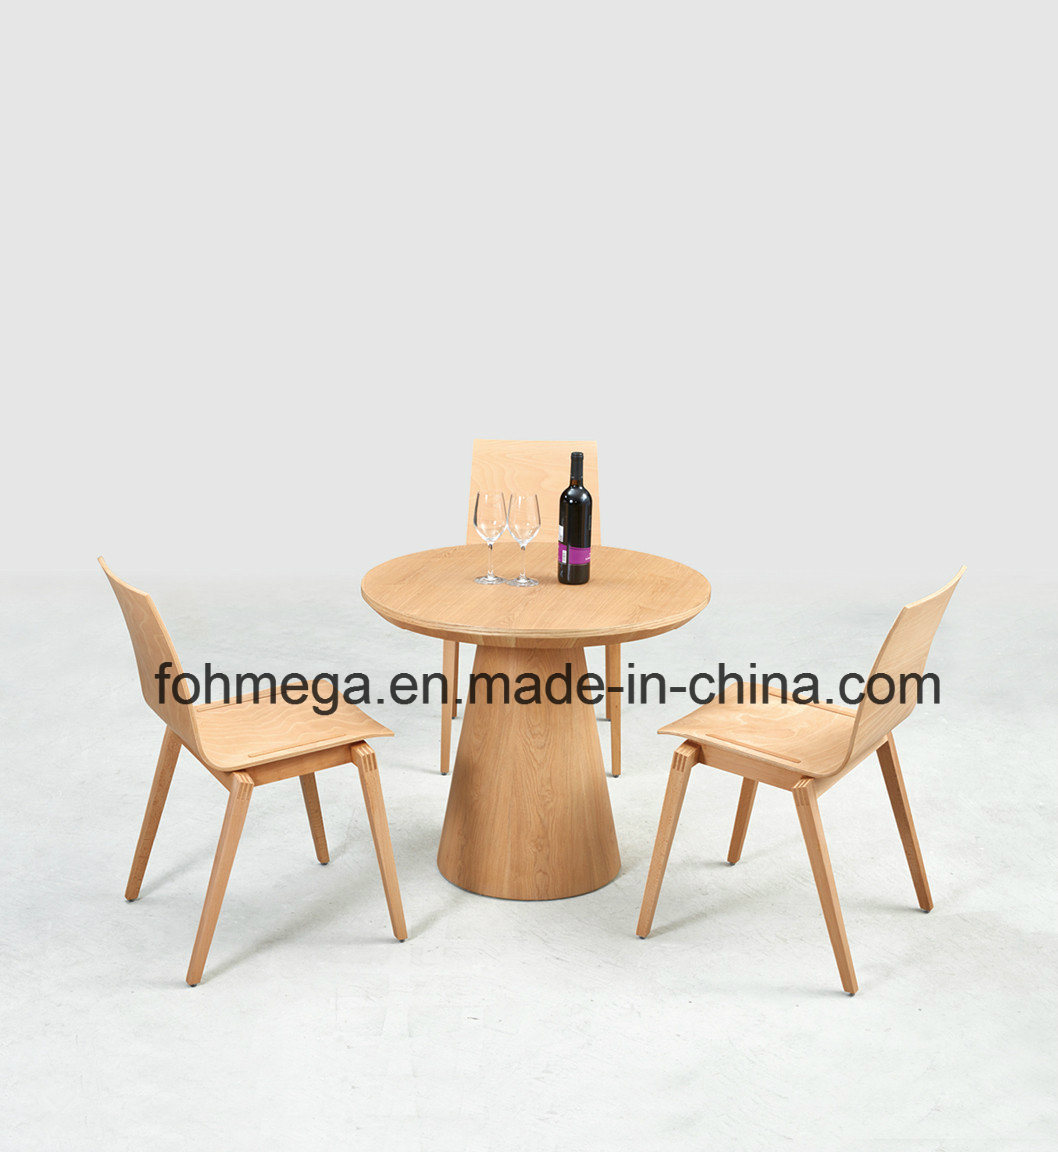 Factory Directly Wood Round Cafe Table with Chairs